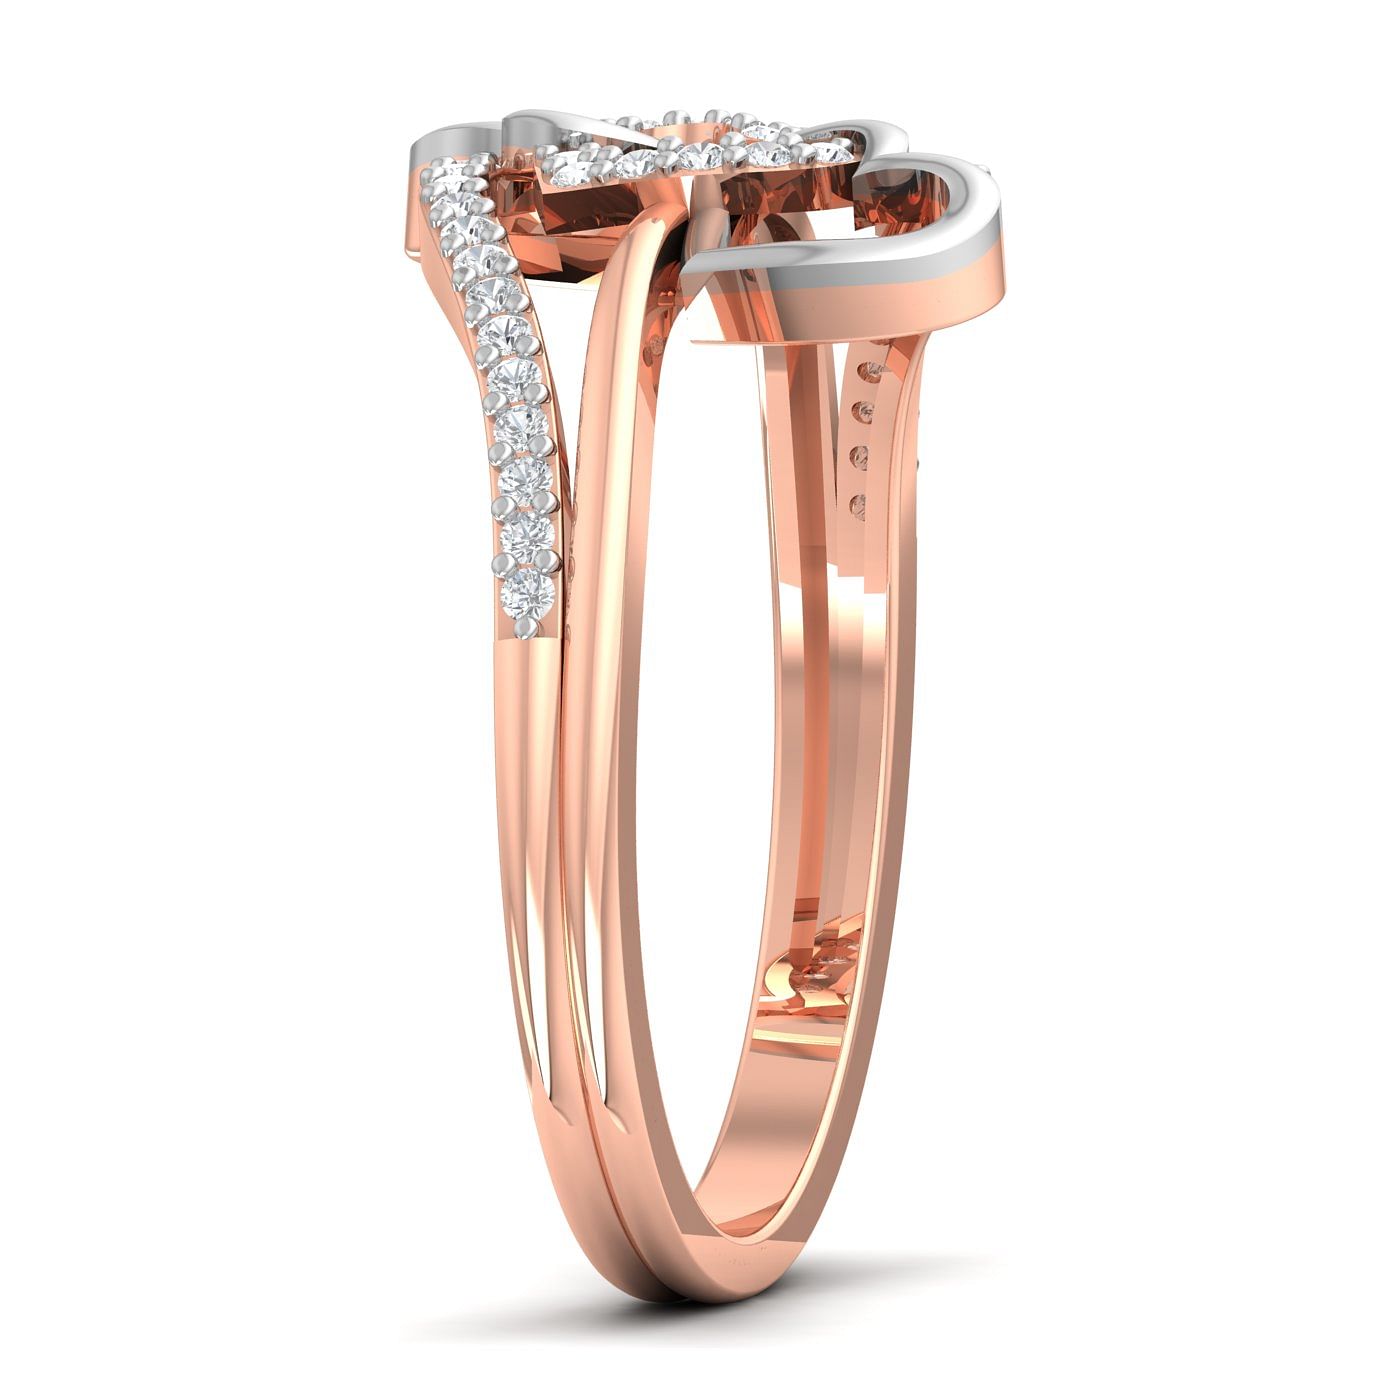 10k Rose Gold Love triangle Wedding Ring For Her